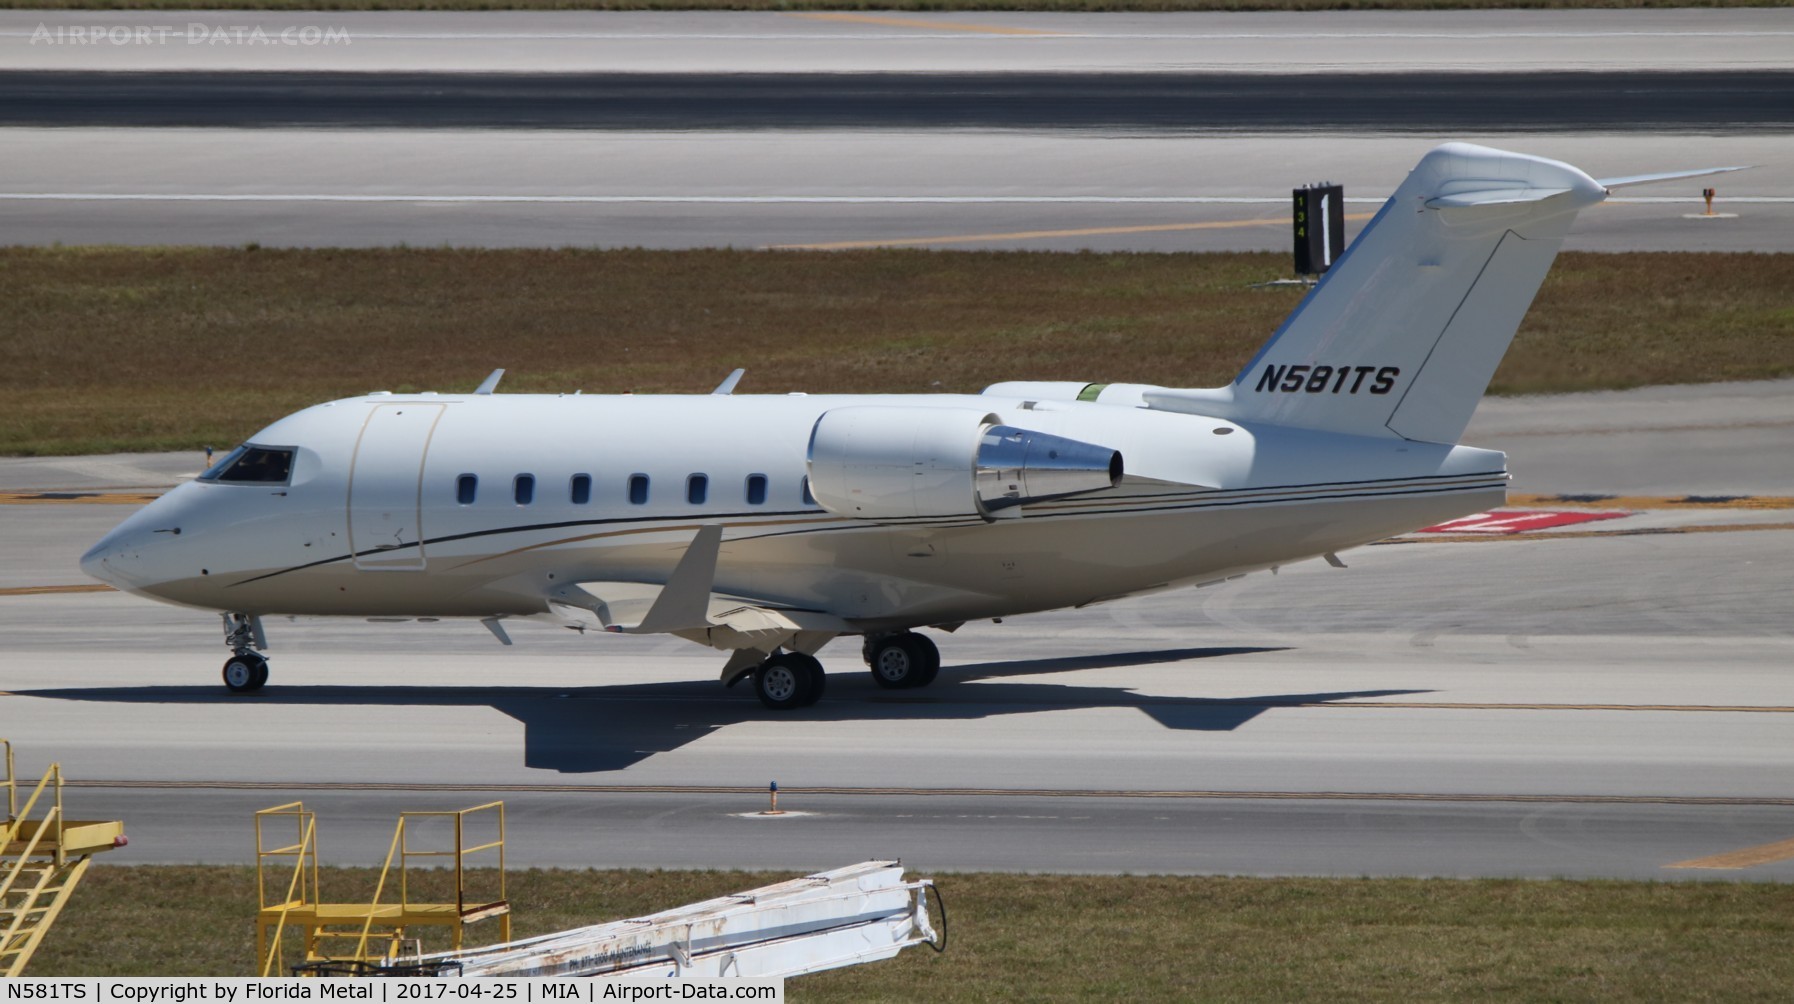 N581TS, 2001 Bombardier Challenger 604 (CL-600-2B16) C/N 5482, Challenger 604